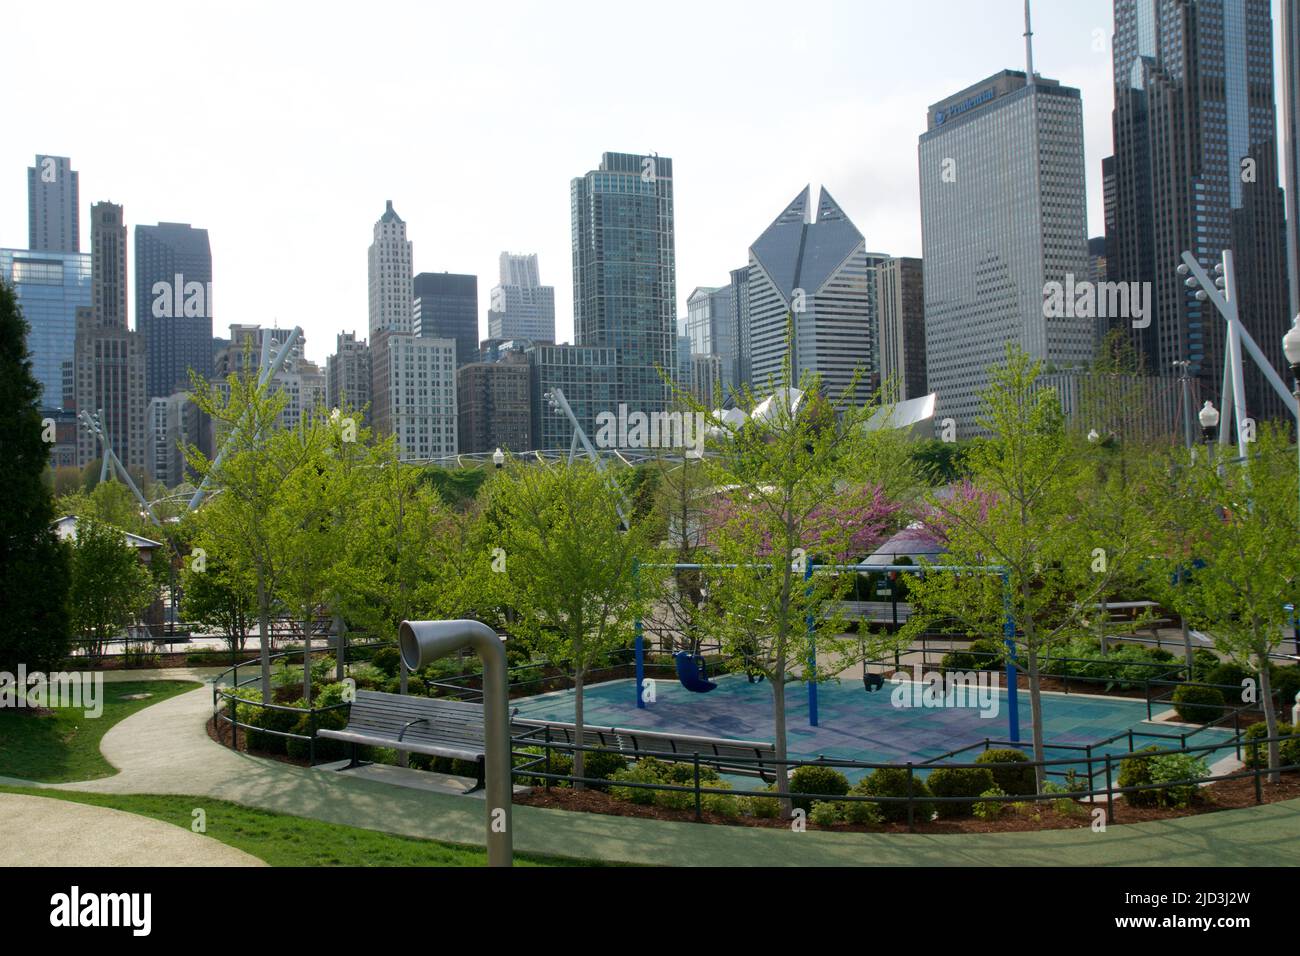 CHICAGO, ILLINOIS, UNITED STATES - 11 May 2018: Children's playground at Maggie Daley Park in downtown Chicago Stock Photo